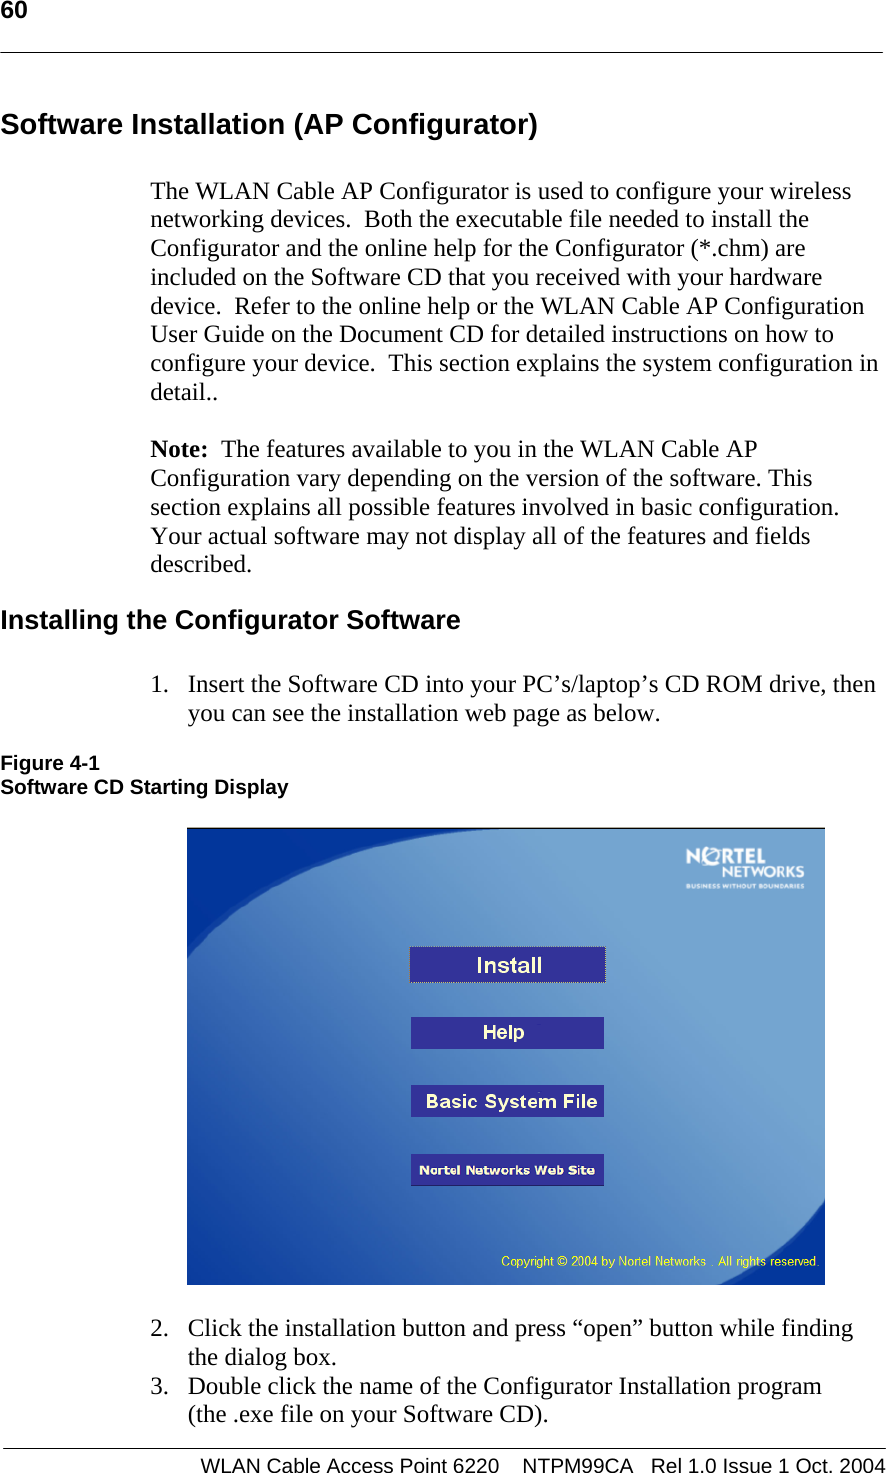   60   Software Installation (AP Configurator)  The WLAN Cable AP Configurator is used to configure your wireless networking devices.  Both the executable file needed to install the Configurator and the online help for the Configurator (*.chm) are included on the Software CD that you received with your hardware device.  Refer to the online help or the WLAN Cable AP Configuration User Guide on the Document CD for detailed instructions on how to configure your device.  This section explains the system configuration in detail..  Note:  The features available to you in the WLAN Cable AP Configuration vary depending on the version of the software. This  section explains all possible features involved in basic configuration.  Your actual software may not display all of the features and fields described. Installing the Configurator Software  1. Insert the Software CD into your PC’s/laptop’s CD ROM drive, then  you can see the installation web page as below.  Figure 4-1 Software CD Starting Display    2. Click the installation button and press “open” button while finding the dialog box. 3. Double click the name of the Configurator Installation program (the .exe file on your Software CD).  WLAN Cable Access Point 6220    NTPM99CA   Rel 1.0 Issue 1 Oct. 2004